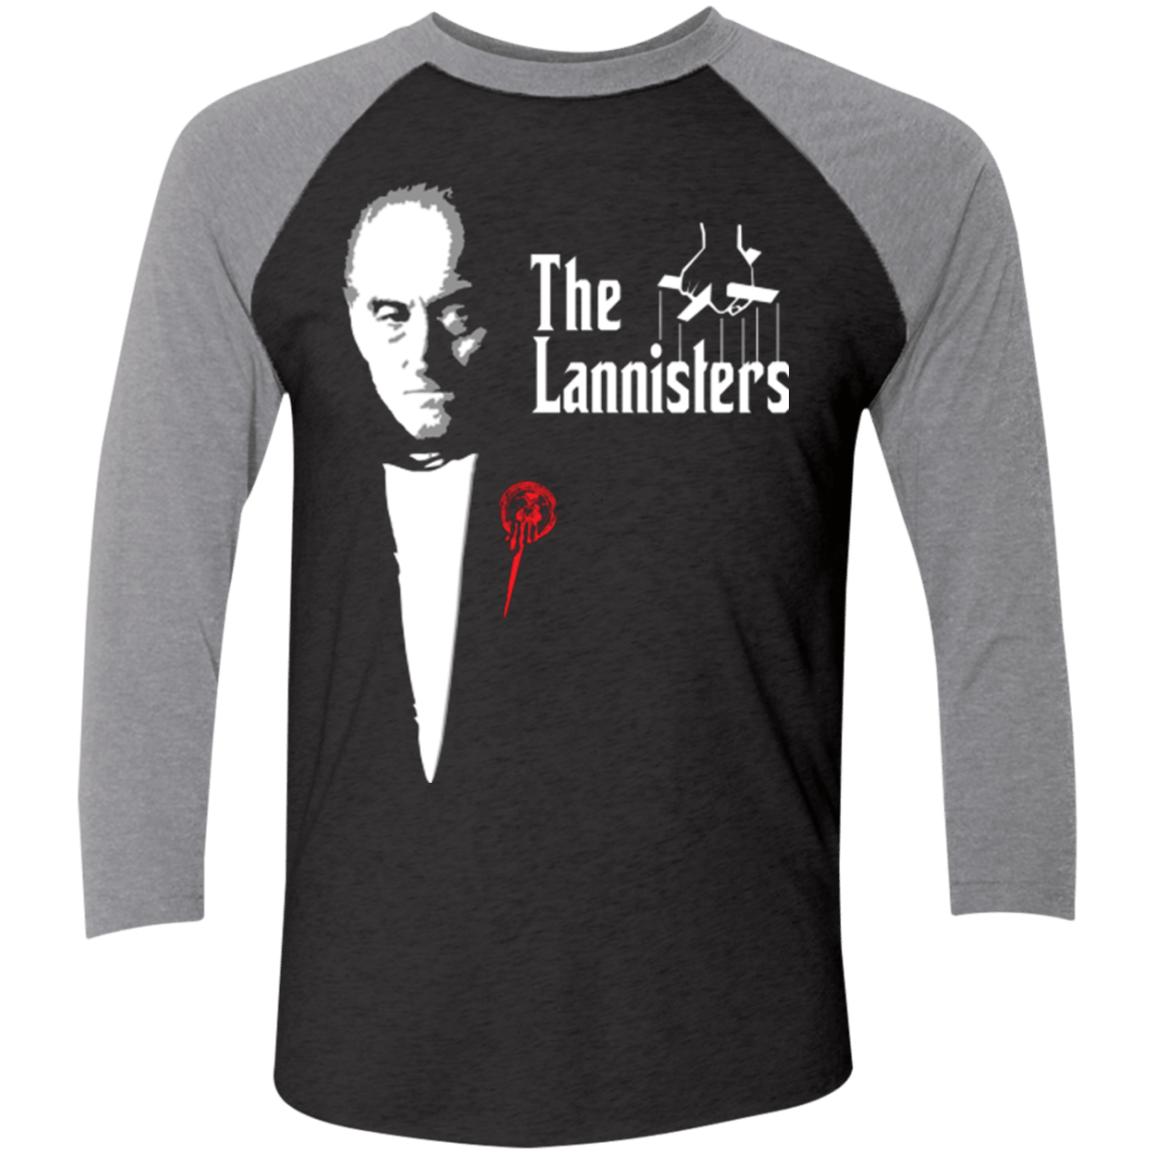 T-Shirts Vintage Black/Premium Heather / X-Small The Lannisters Men's Triblend 3/4 Sleeve